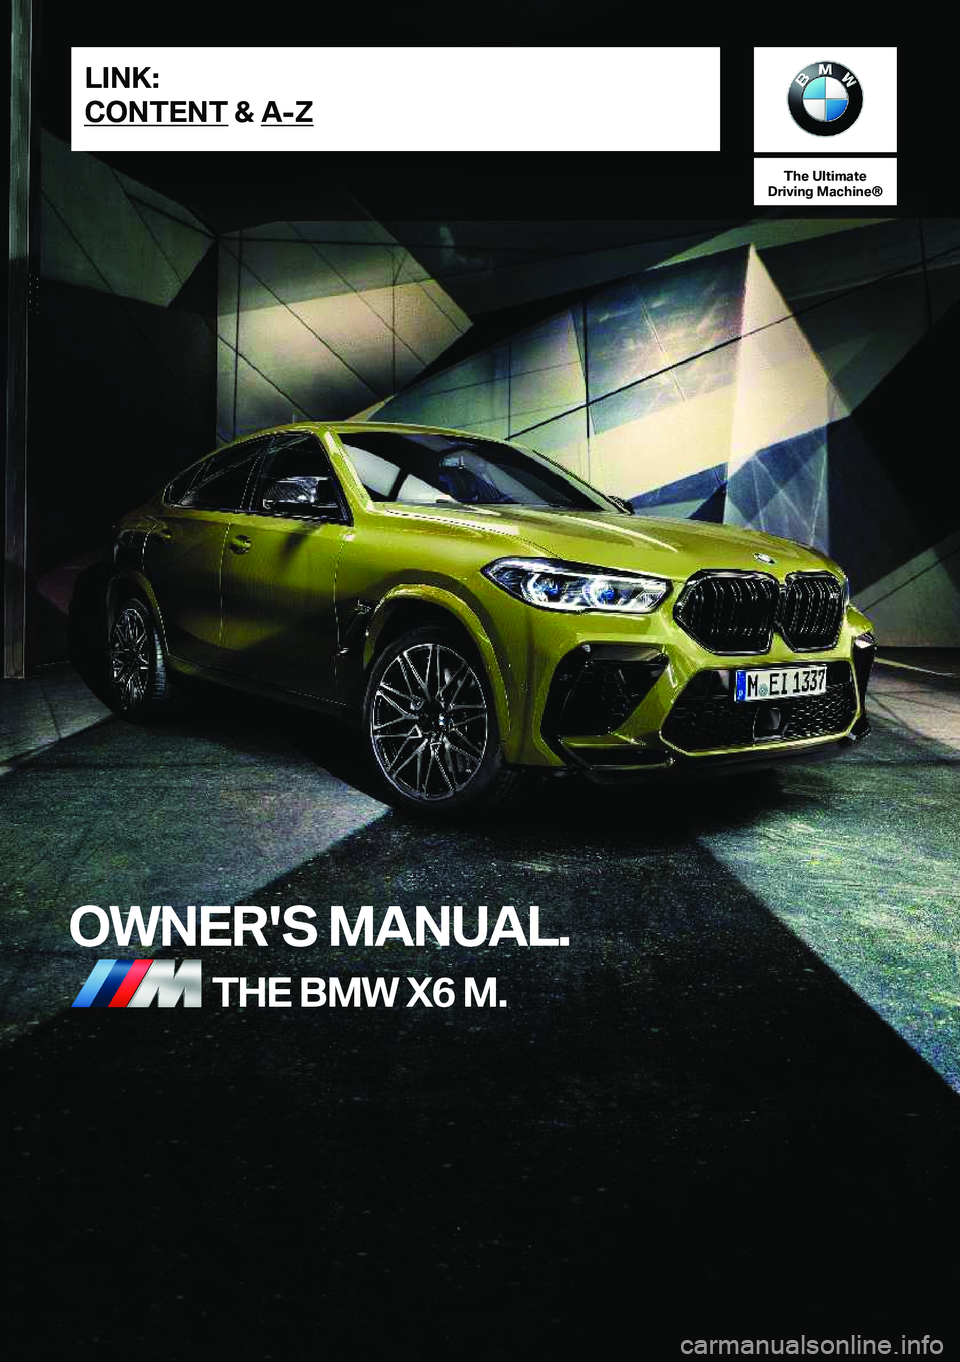 BMW X6 M 2020  Owners Manual �T�h�e��U�l�t�i�m�a�t�e
�D�r�i�v�i�n�g��M�a�c�h�i�n�e�n
�O�W�N�E�R�'�S��M�A�N�U�A�L�.�T�H�E��B�M�W��X�6��M�.�L�I�N�K�:
�C�O�N�T�E�N�T��&��A�-�Z�O�n�l�i�n�e��E�d�i�t�i�o�n��f�o�r��P�a�r�